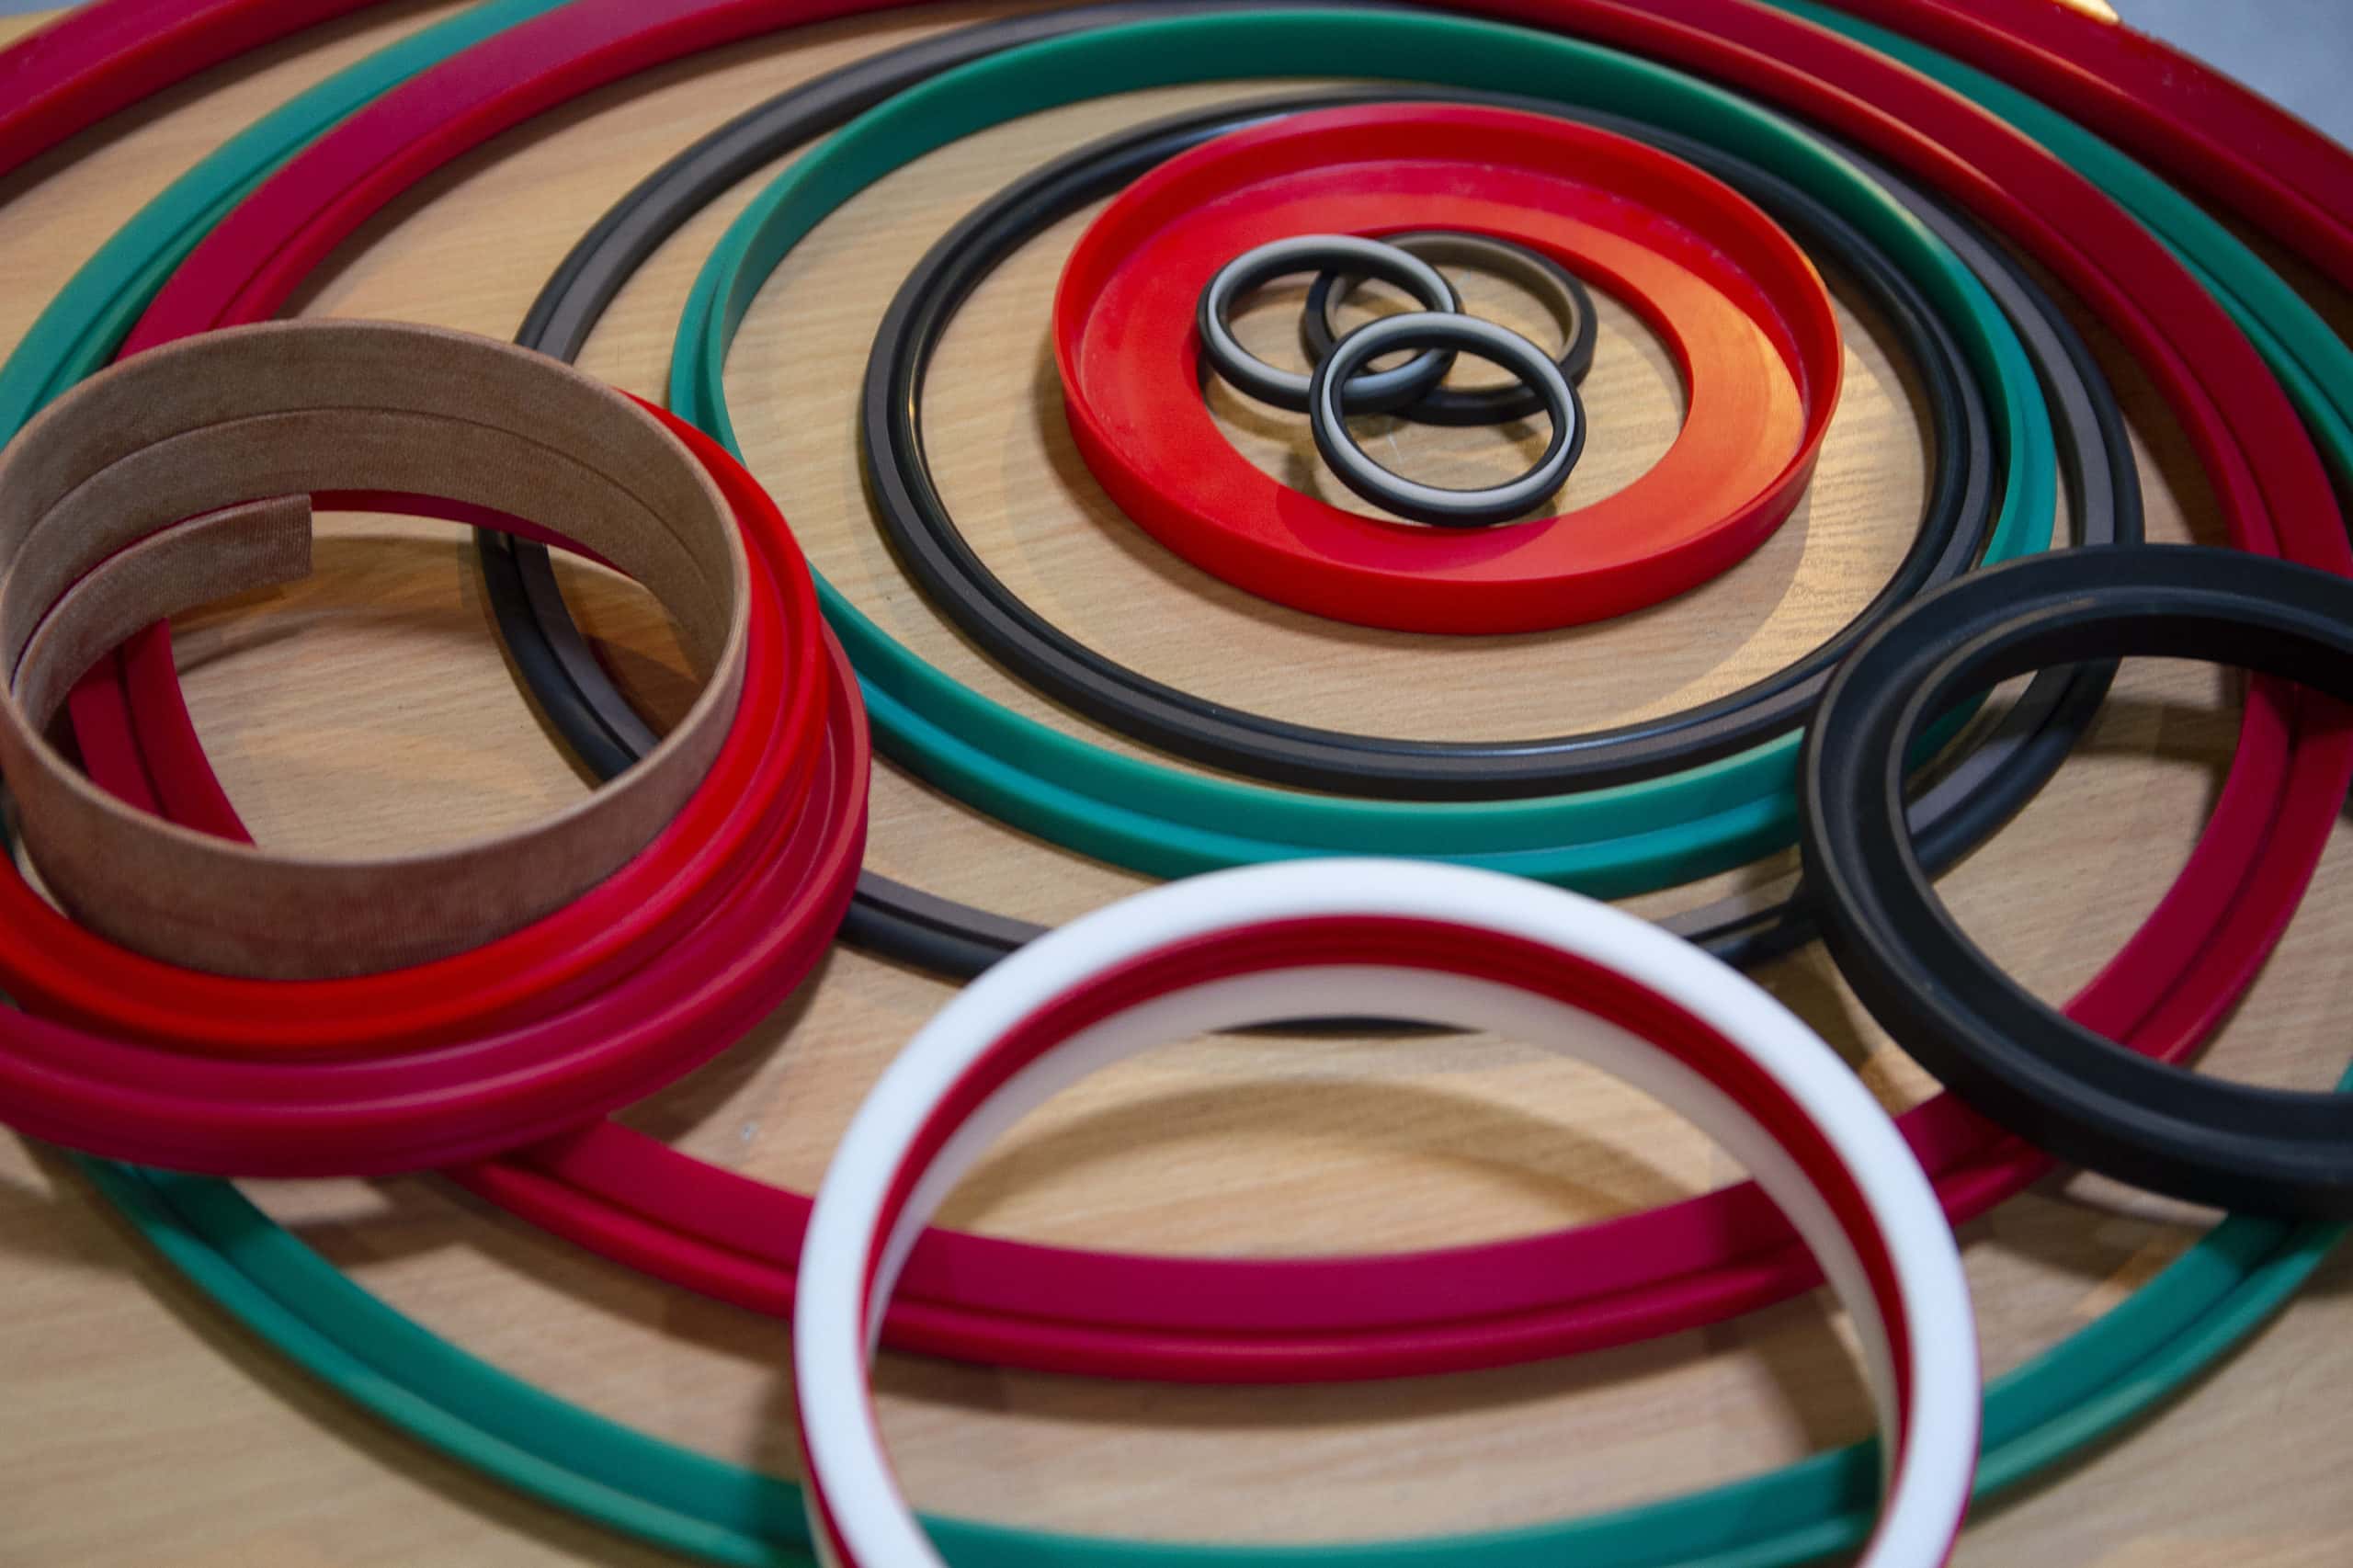 O-Ring: What Is It? How Is It Made? Types Of & Common Uses